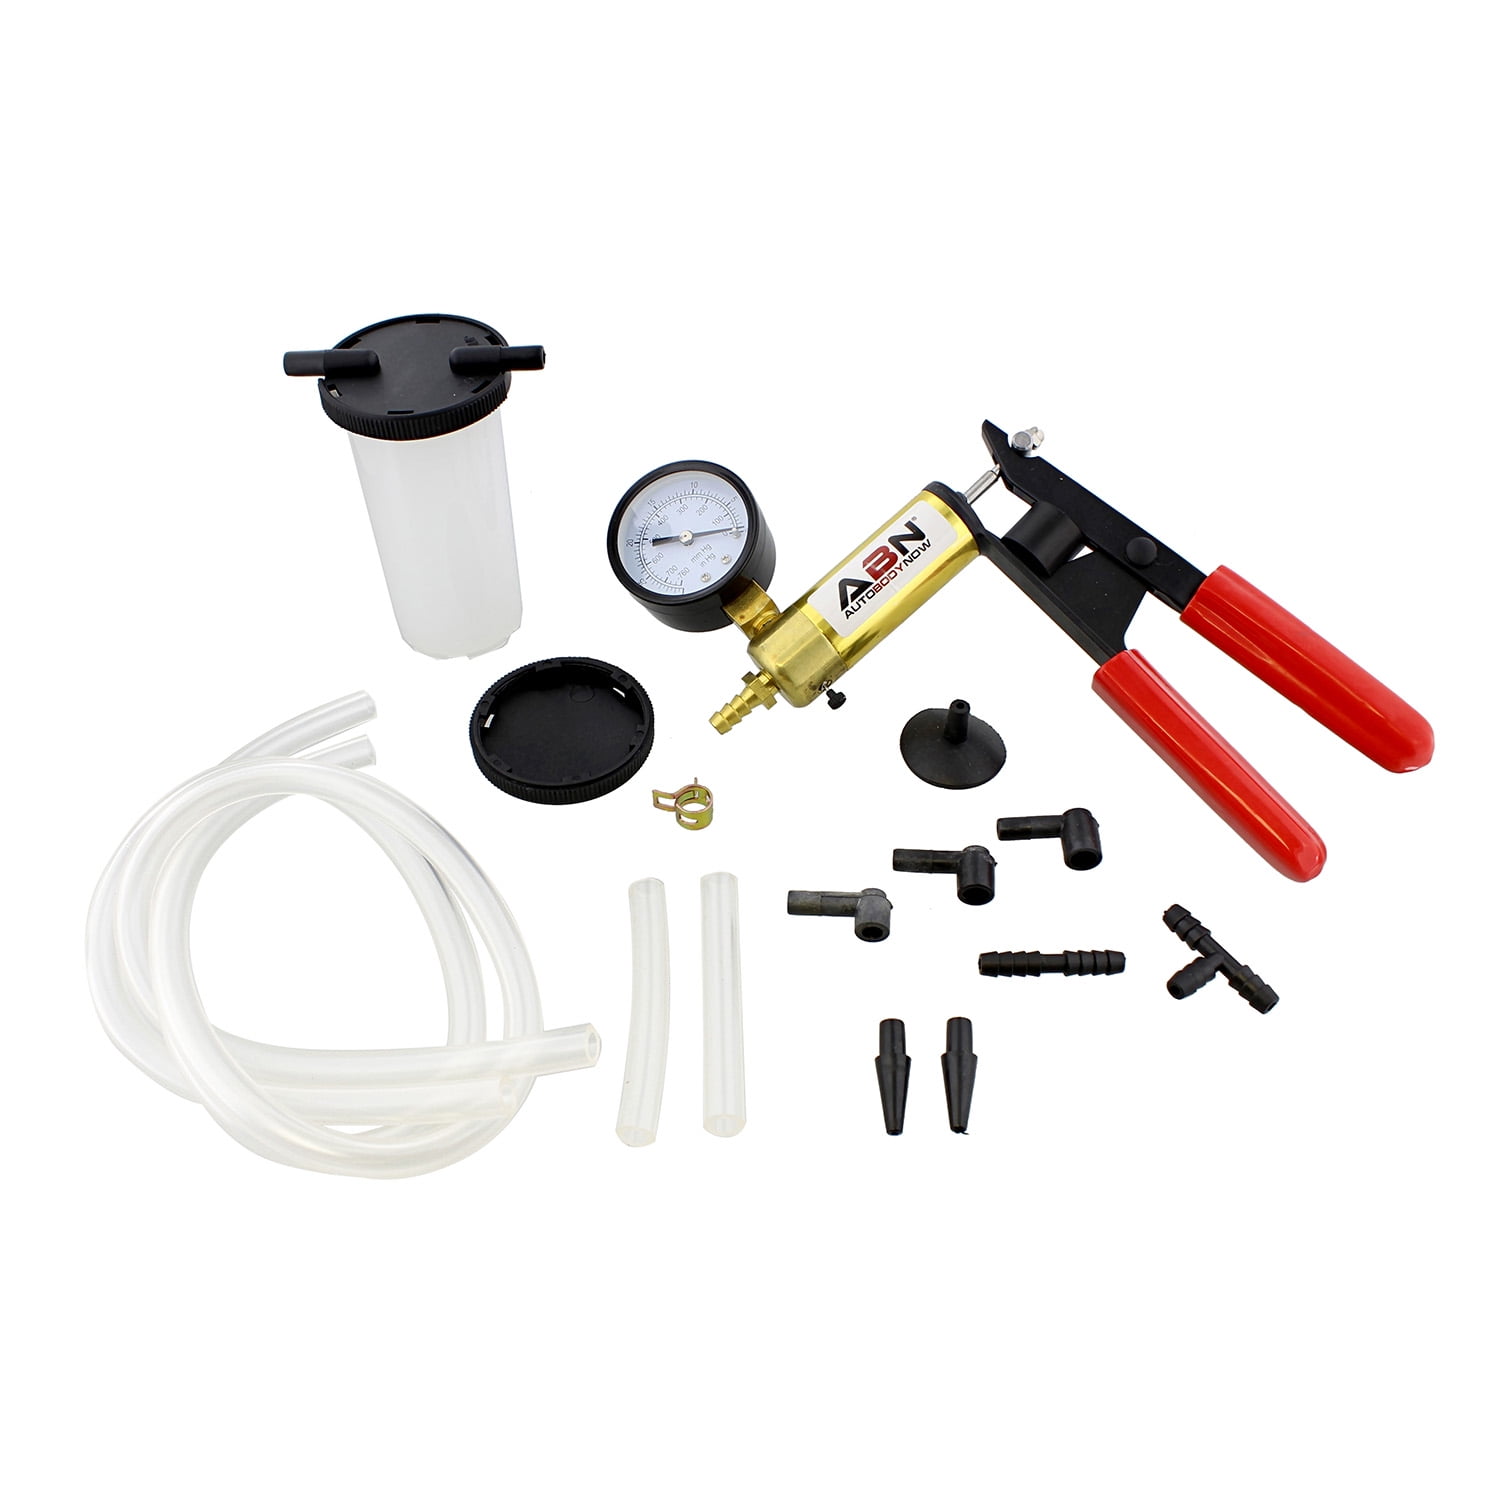 Lightning Fast and Hands Free Deluxe Vacuum Brake Bleeder Kit by Air Zapper™